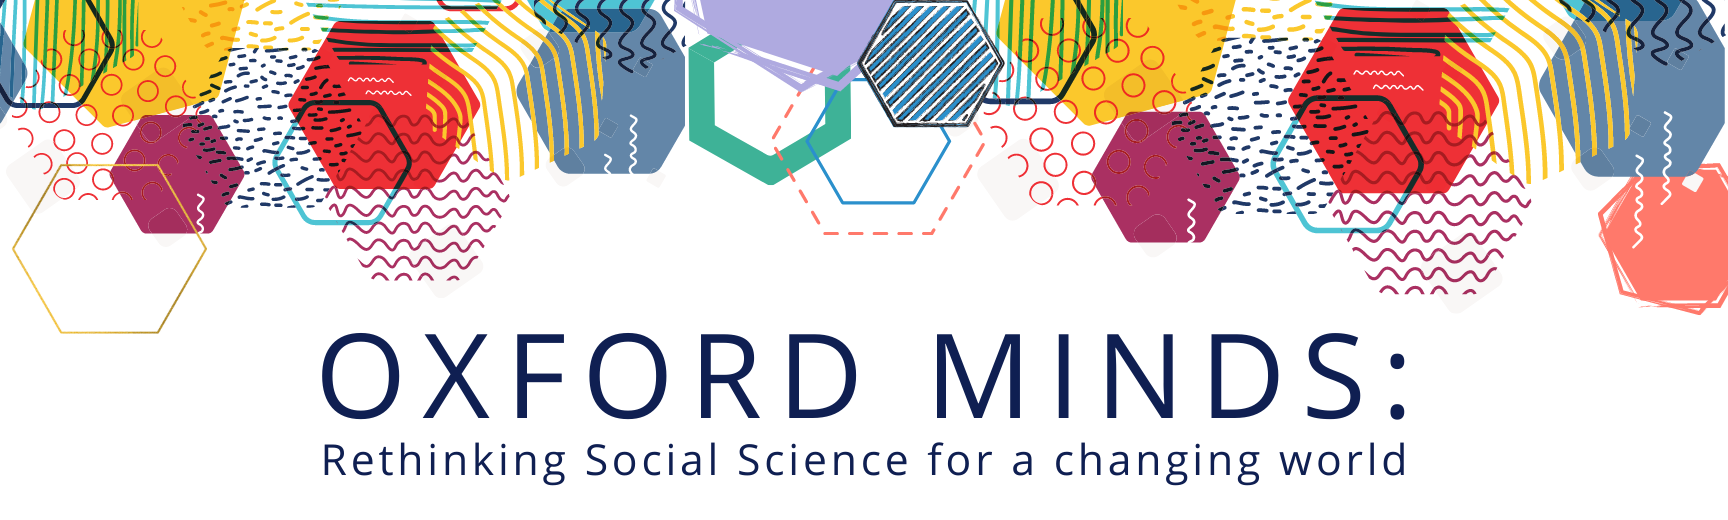 Oxford Minds: Rethinking Social Science for a changing world